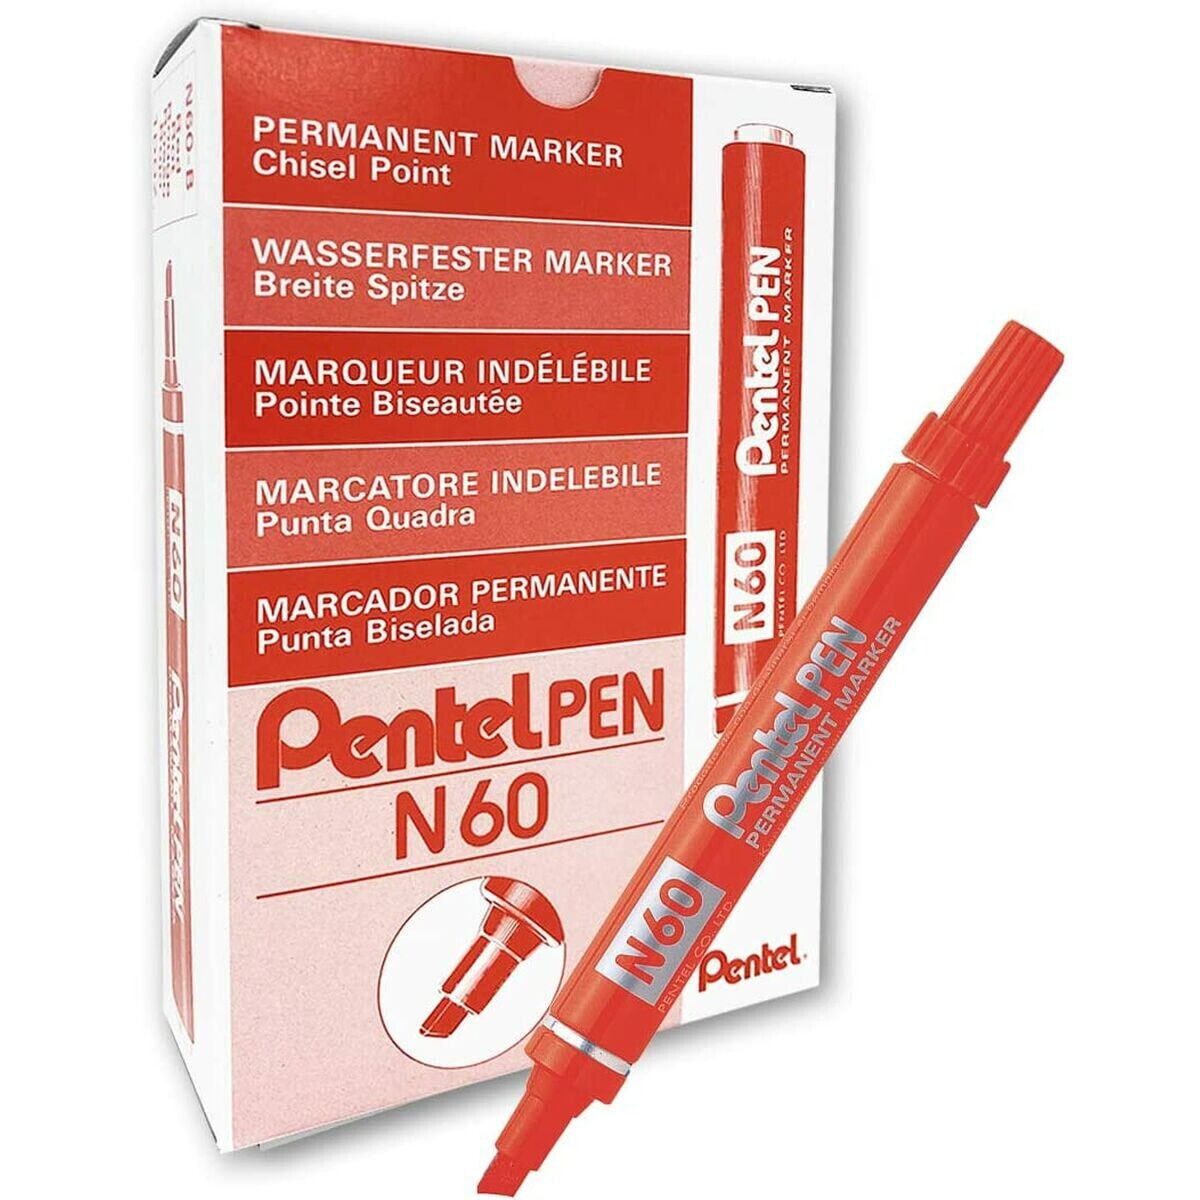 Permanent marker Pentel N60 Red 12 Pieces